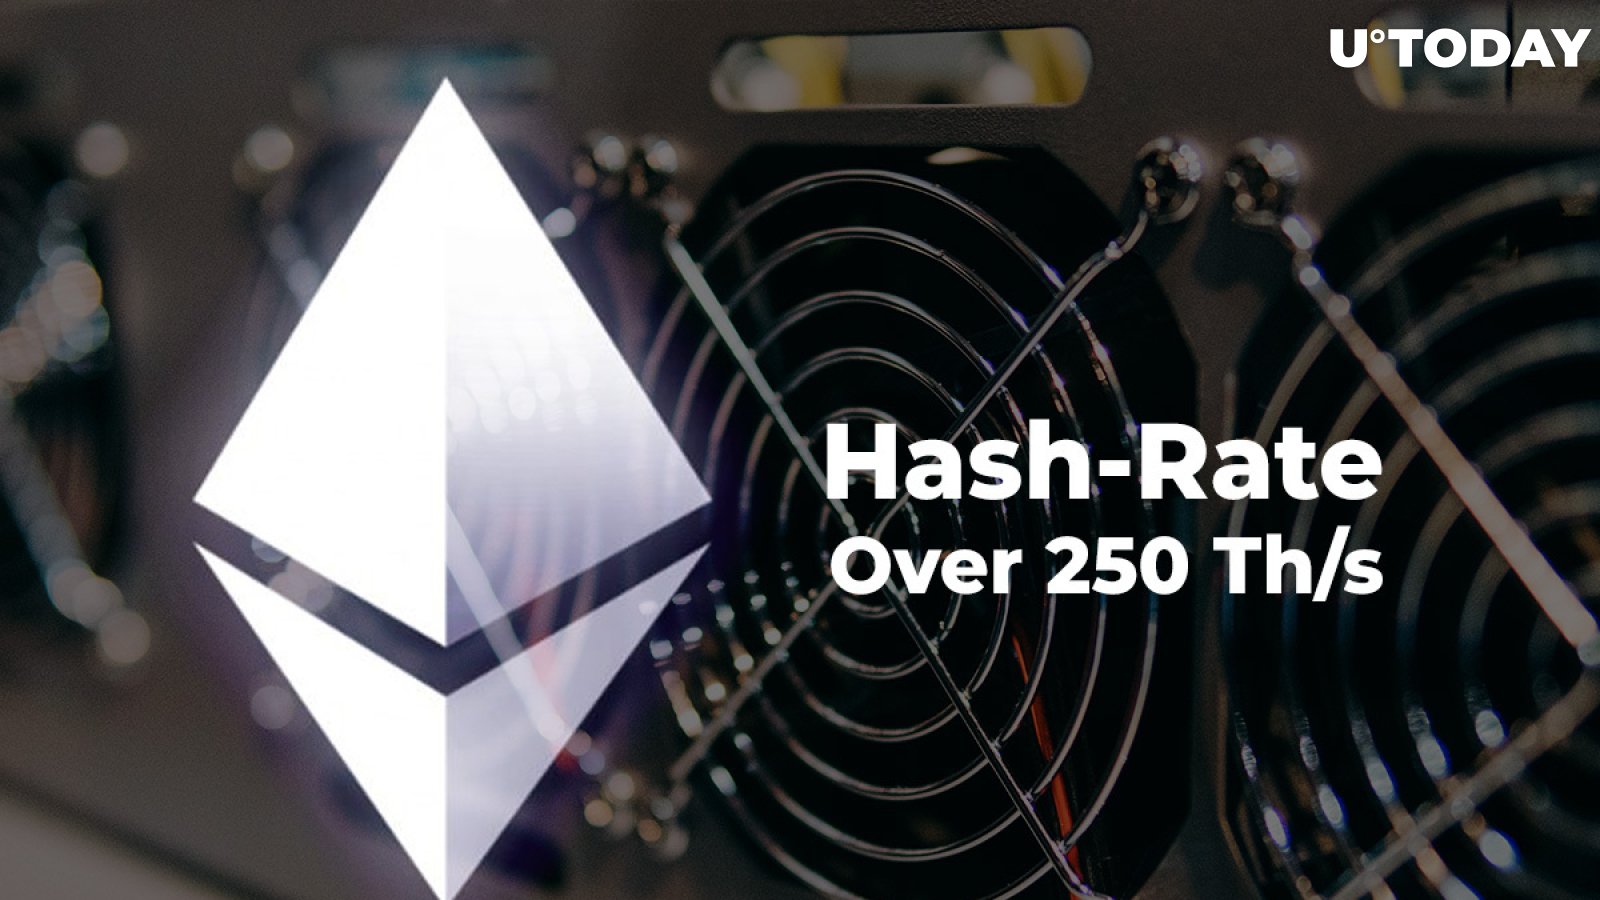 Ethereum (ETH) Hashrate Hits New All-Time High Over 250 Th/s